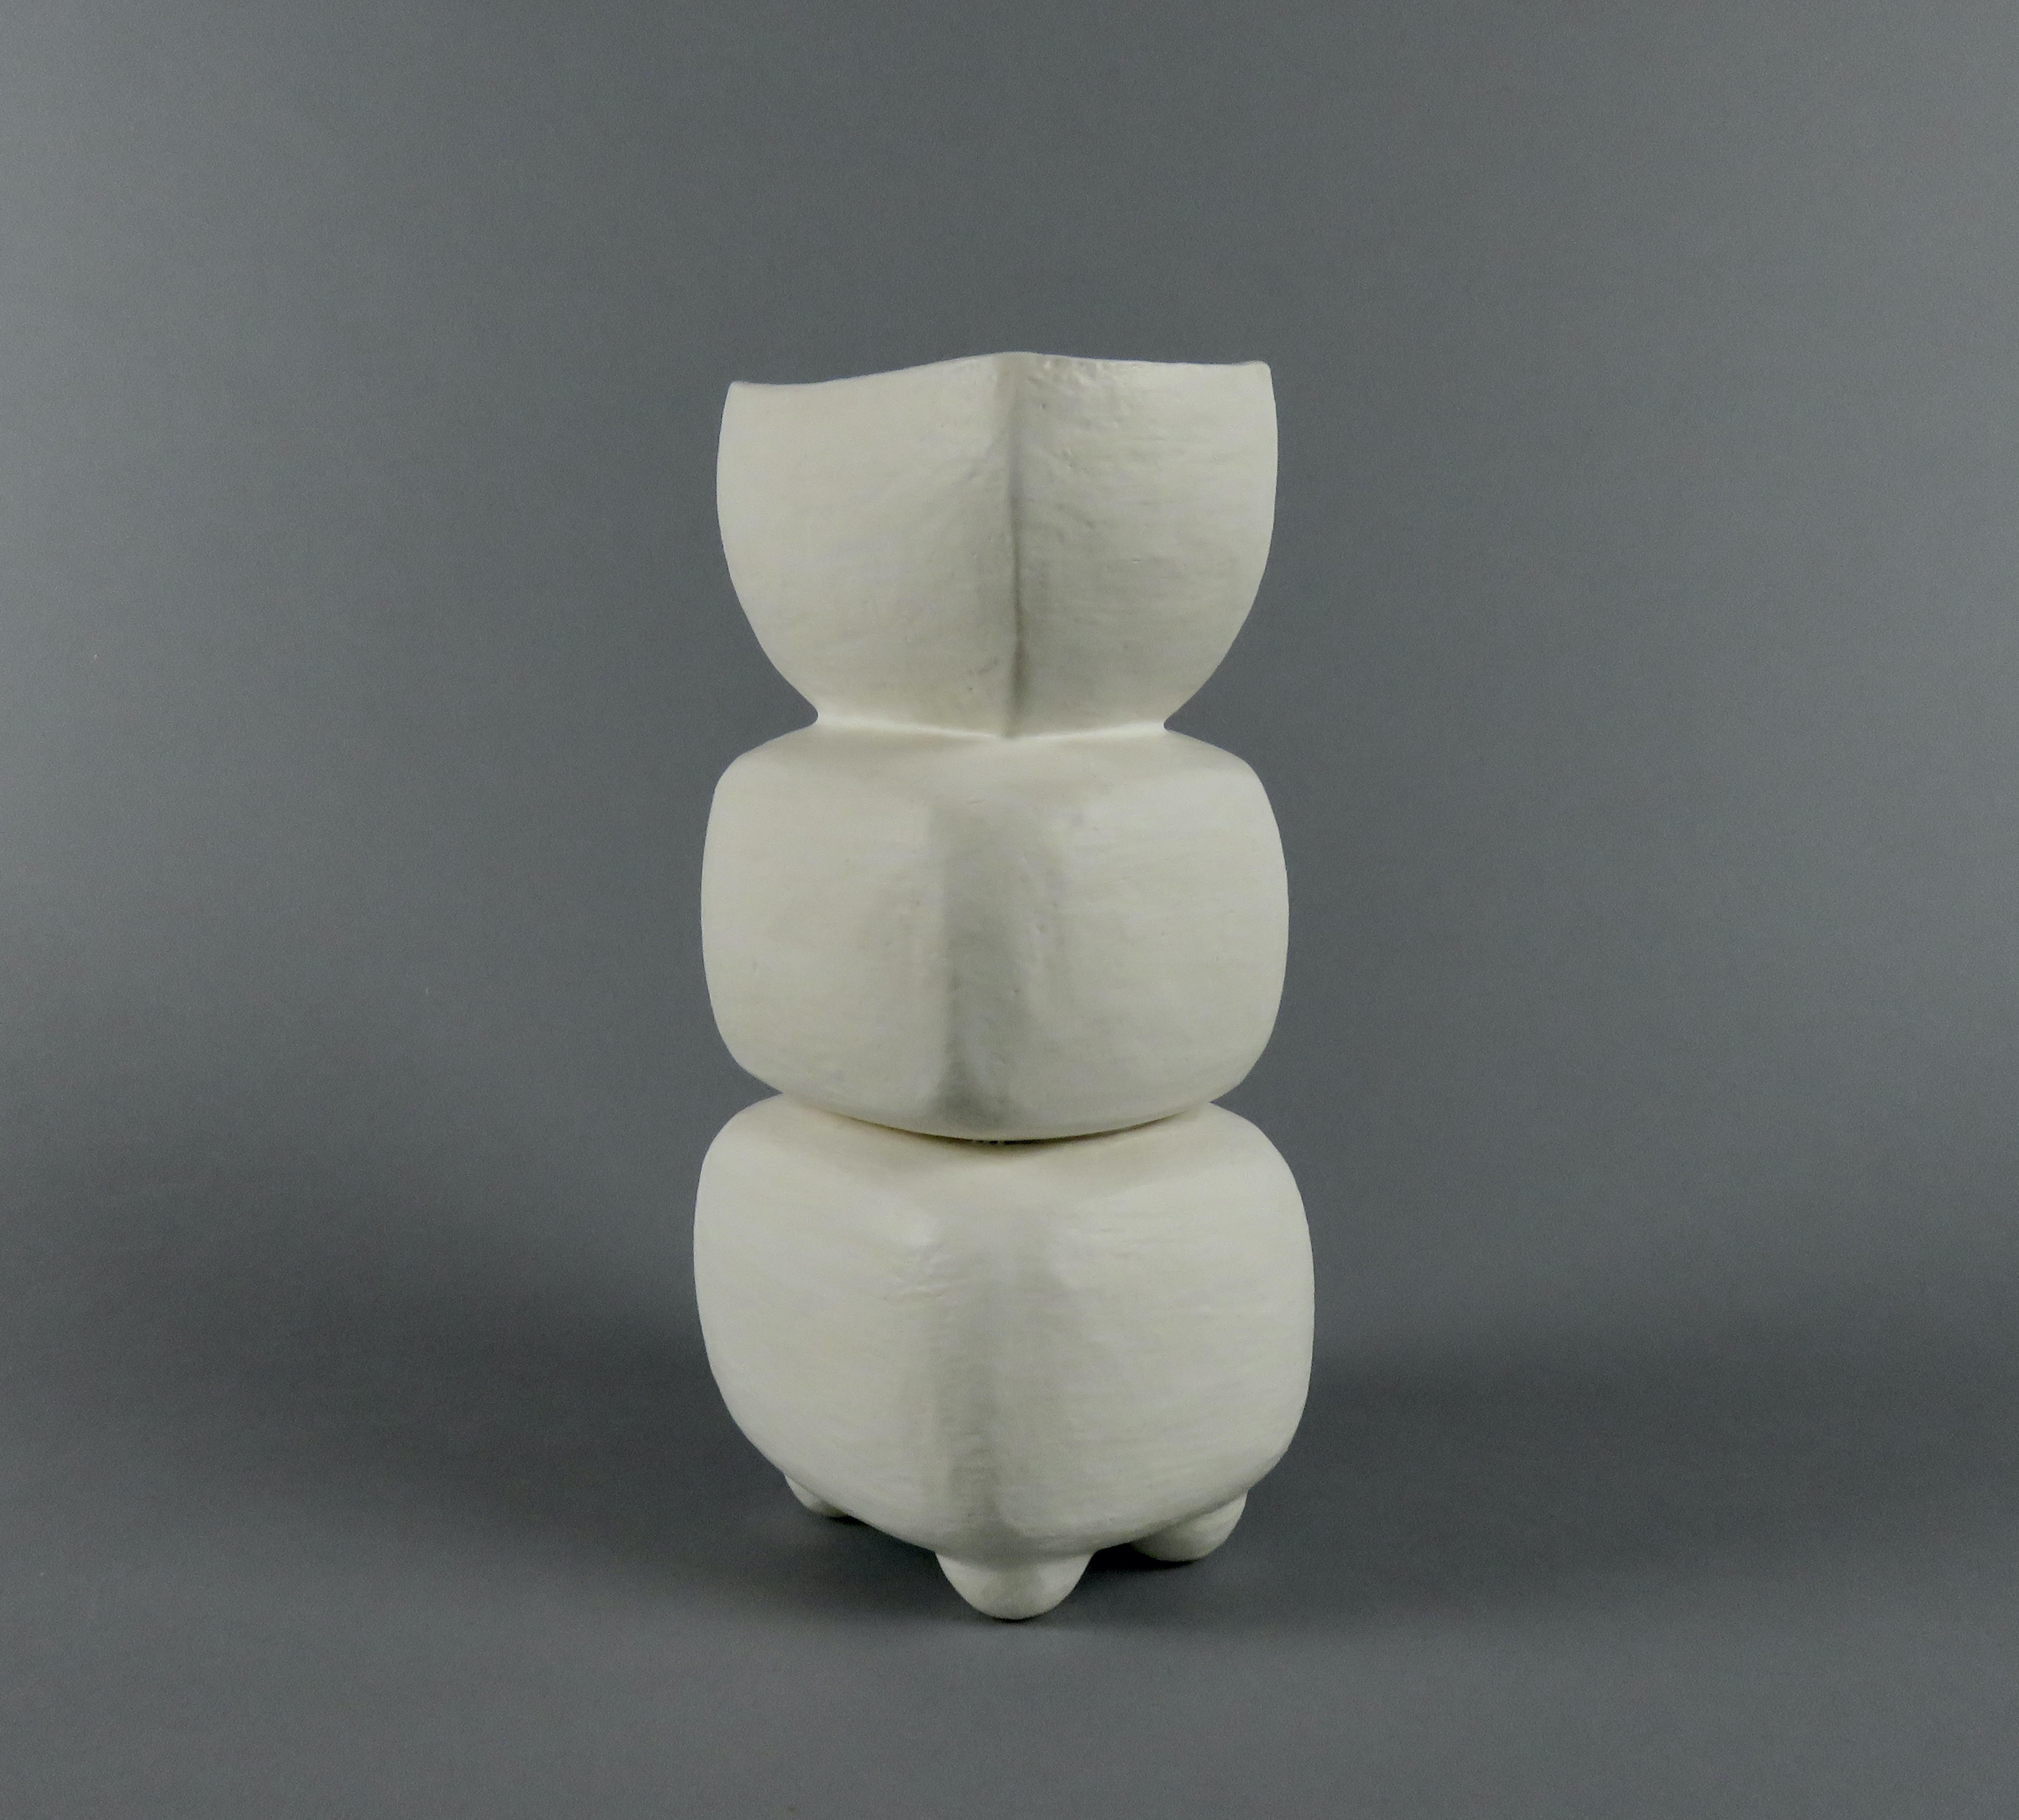 This luscious, creamy, almost waxy off-white surface is the combination of 2 glazes. One in a series of Modern TOTEMS, there are 3 parts, including a rectangular cup form on top. The stacked parts are made separately then combined, and the always